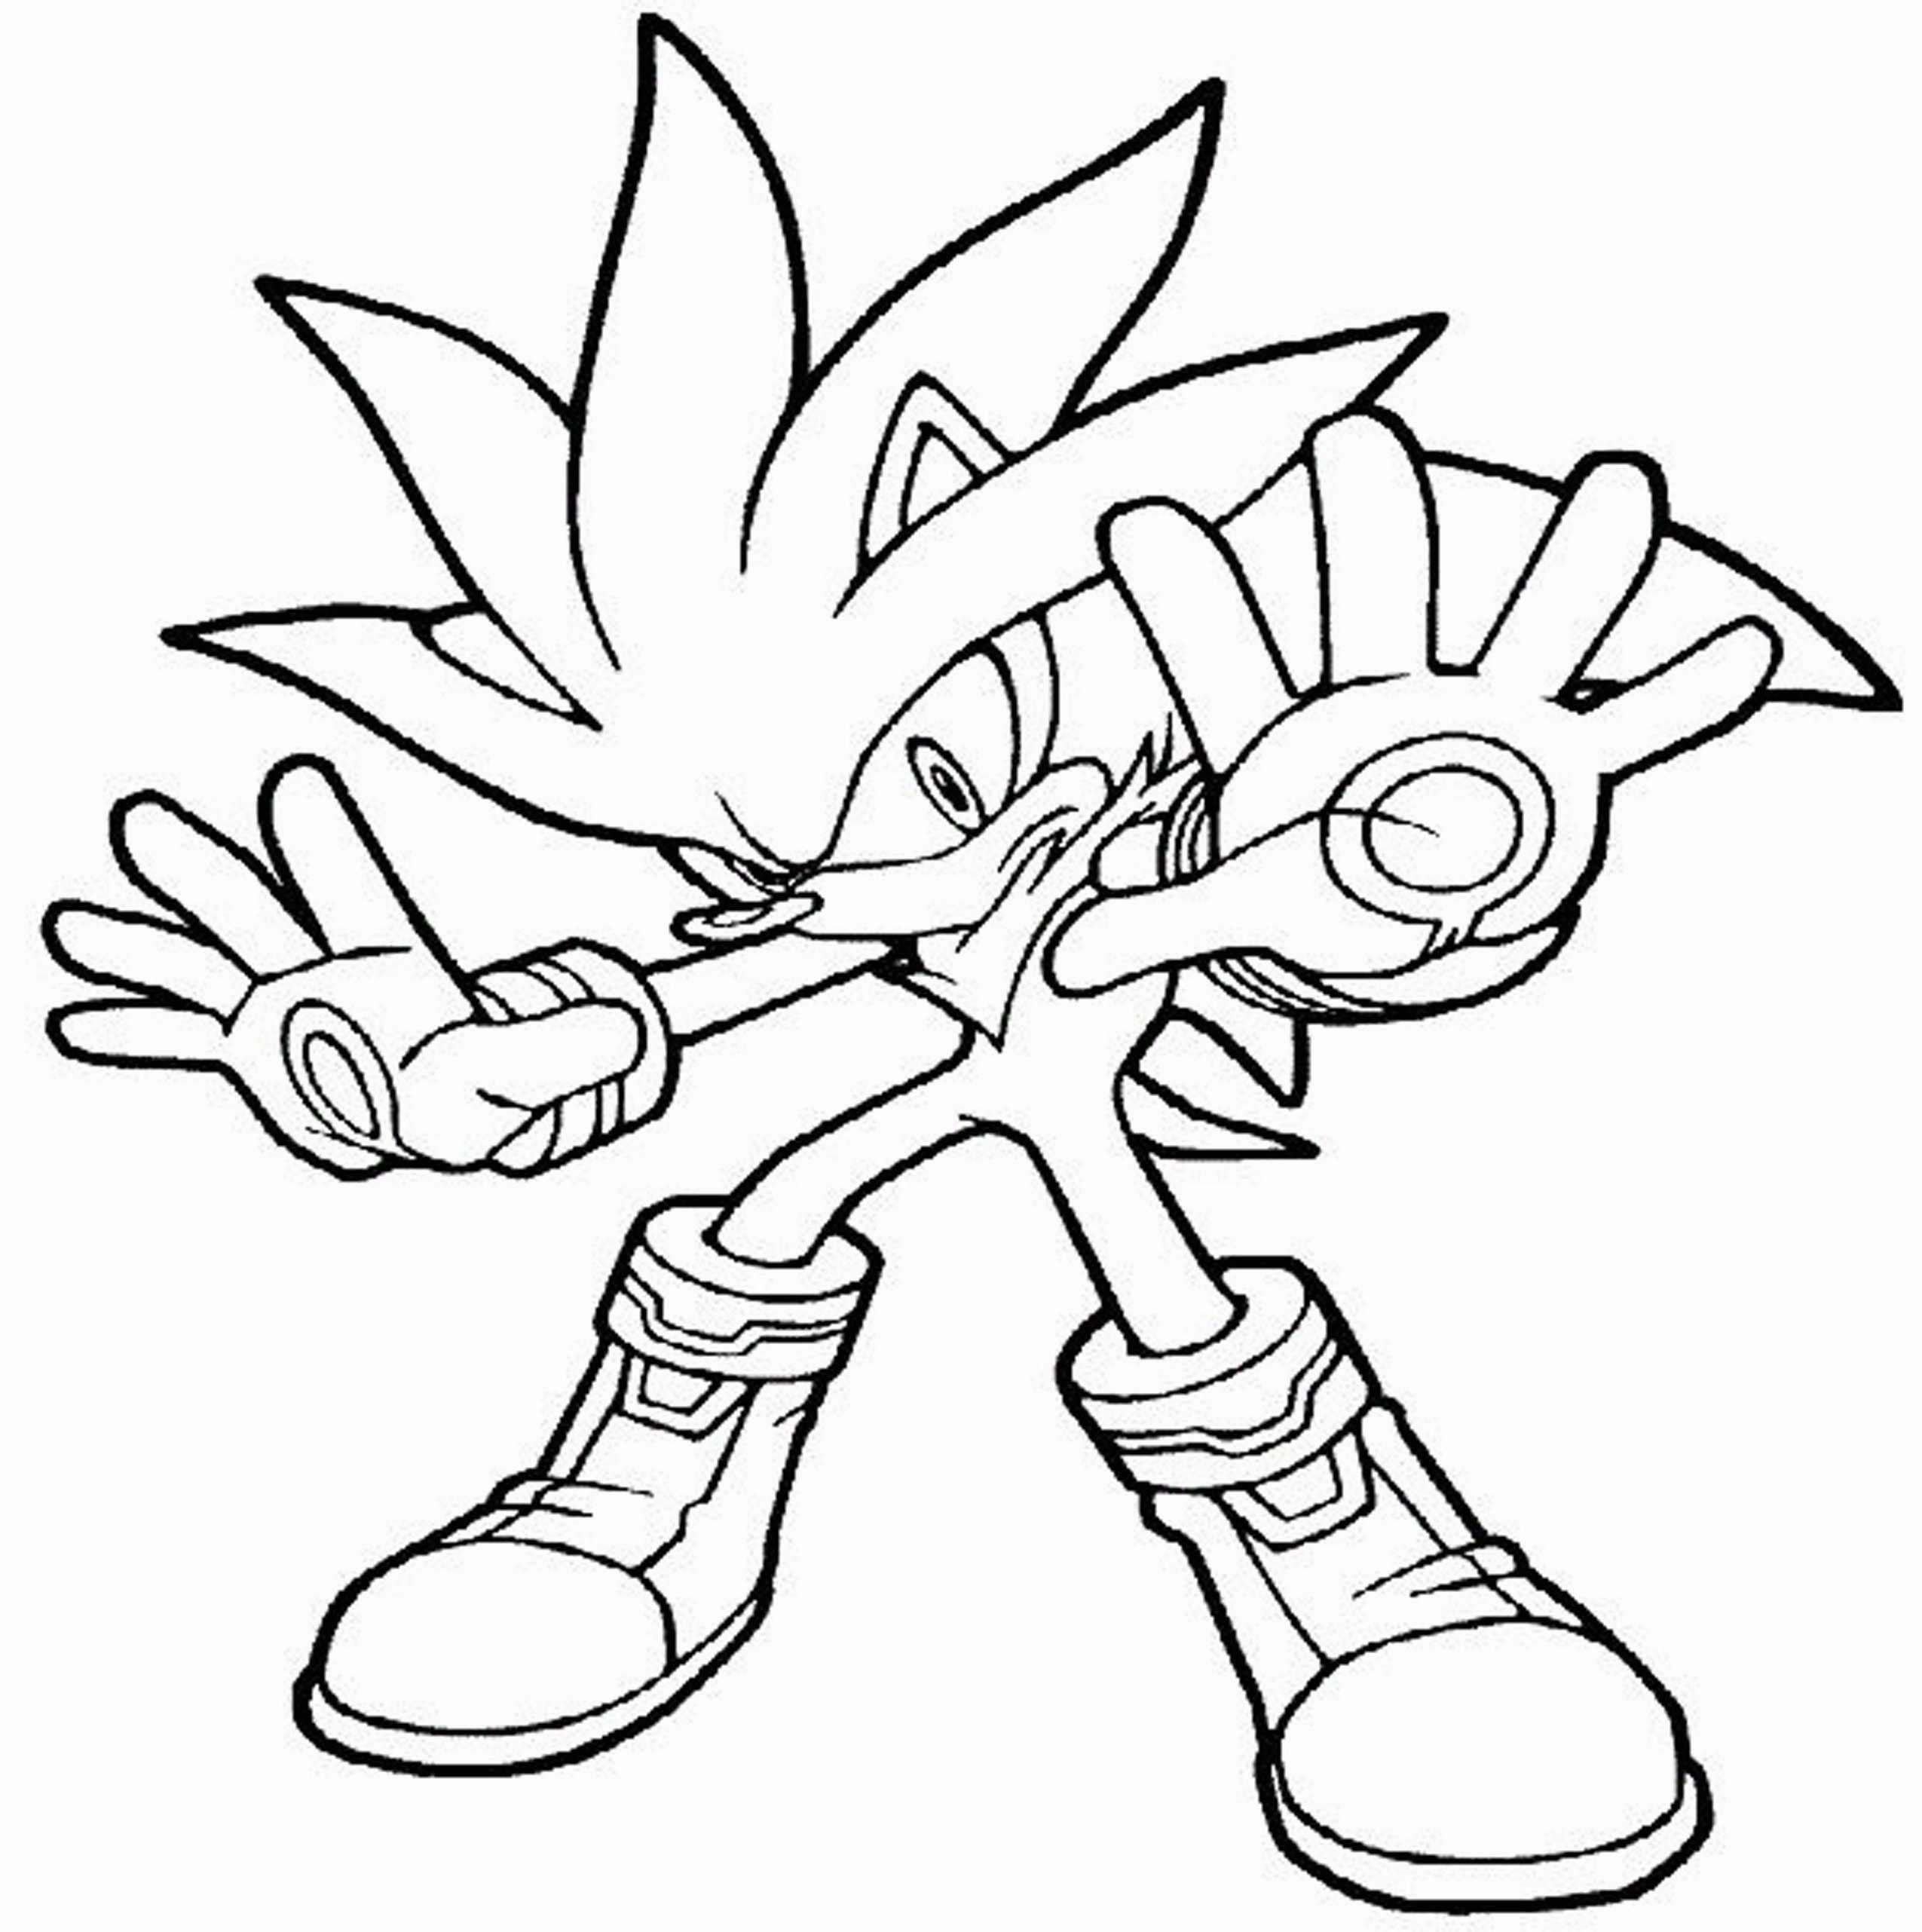 Super Sonic Drawing